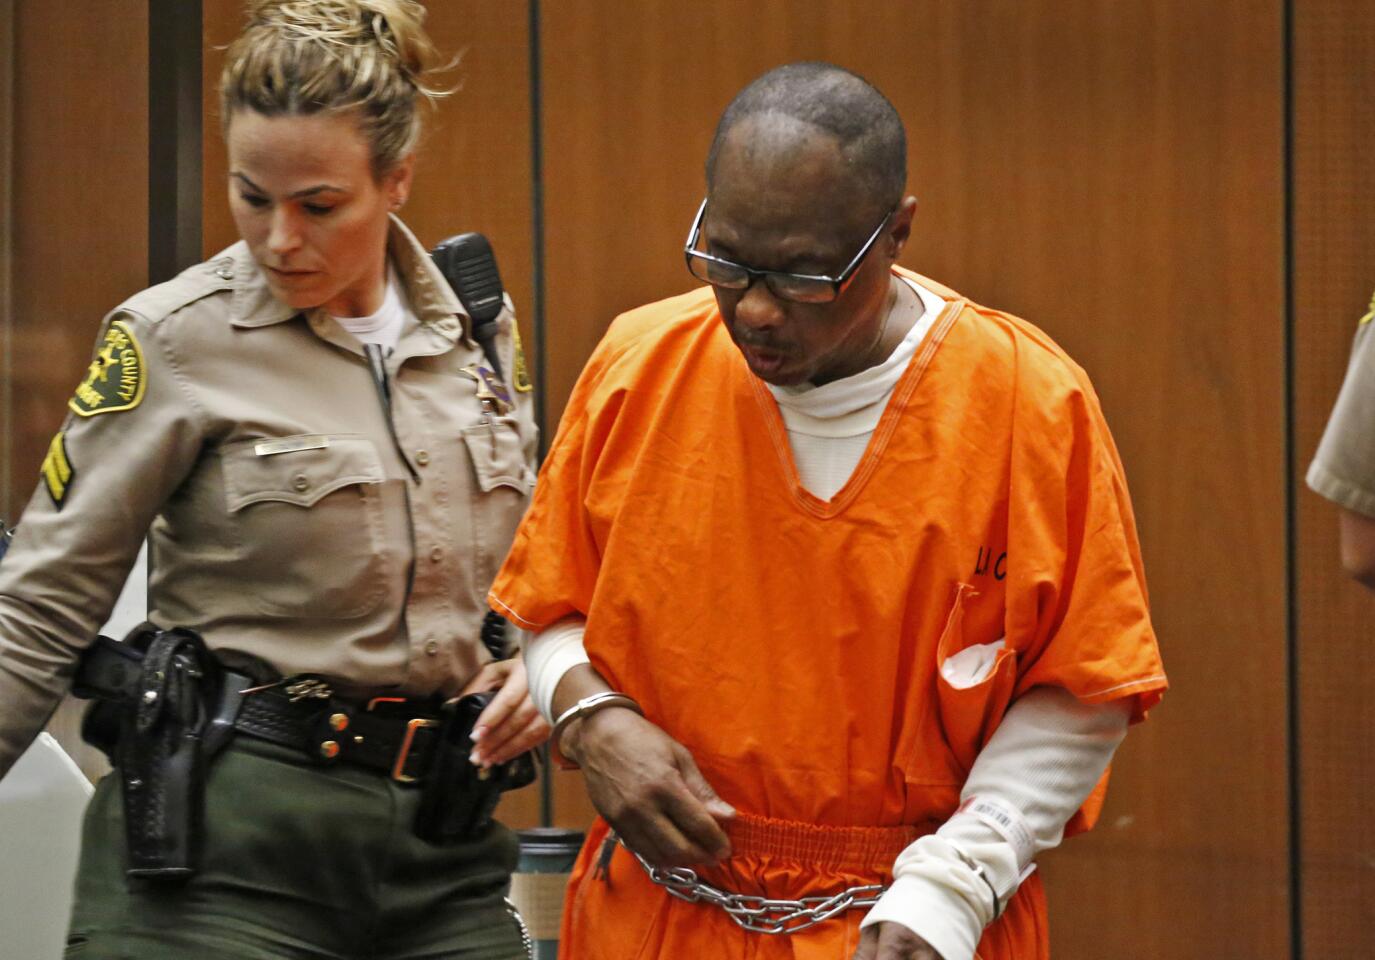 Lonnie David Franklin Jr., the man known as the "Grim Sleeper" serial killer, arrives in a downtown Los Angeles courtroom Wednesday. Franklin was sentenced to death for the slayings of nine women and a teenage girl.